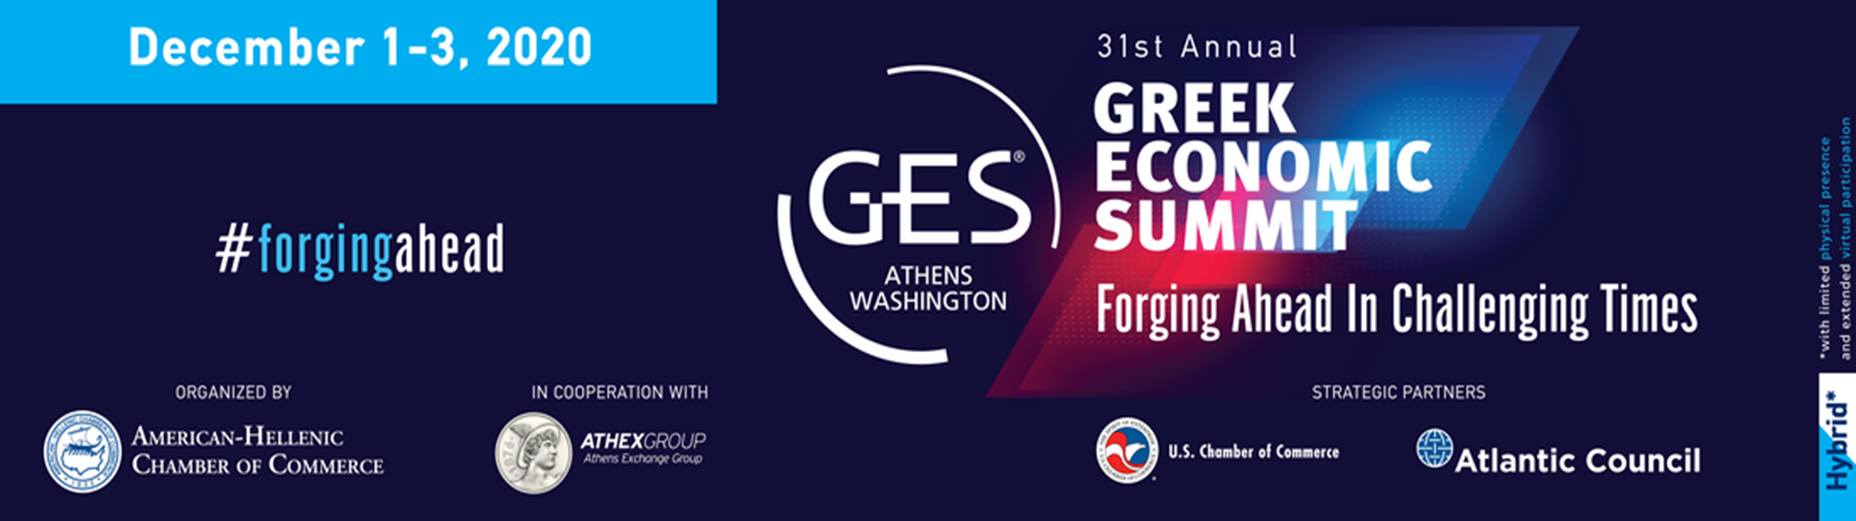 31st Greek Economic Summit GES2020 #Forging Ahead in Challenging Times